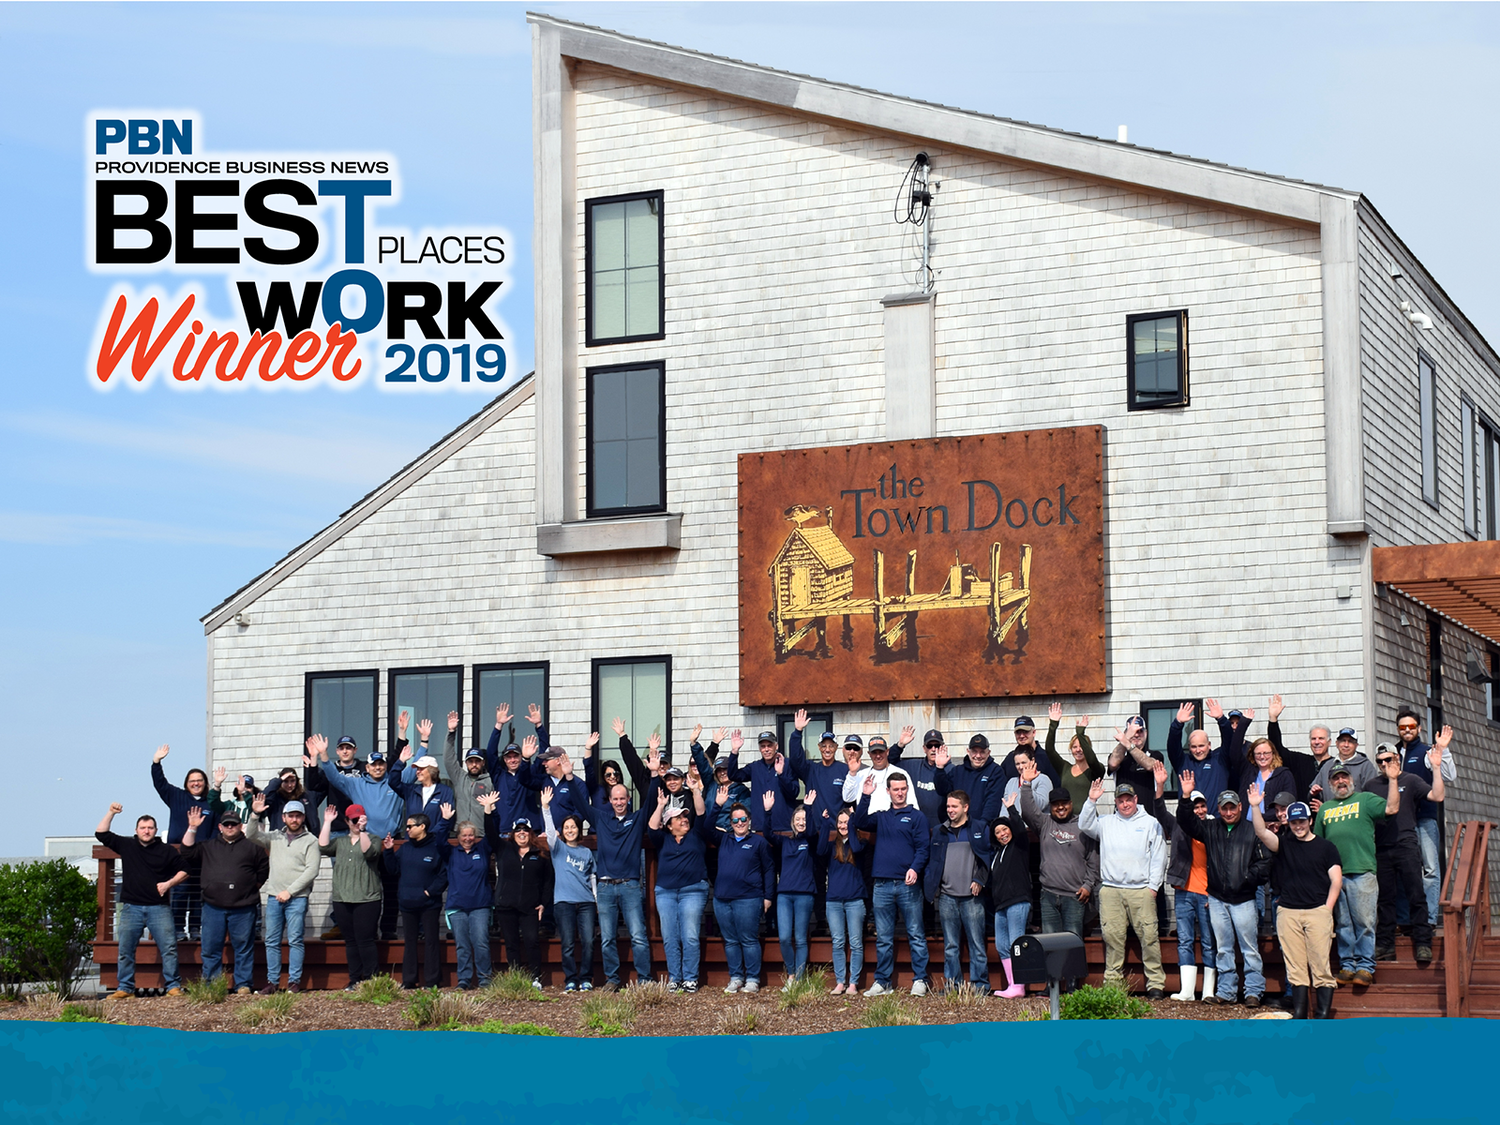 The Town Dock Named Best Place to Work for the Second Year in a Row